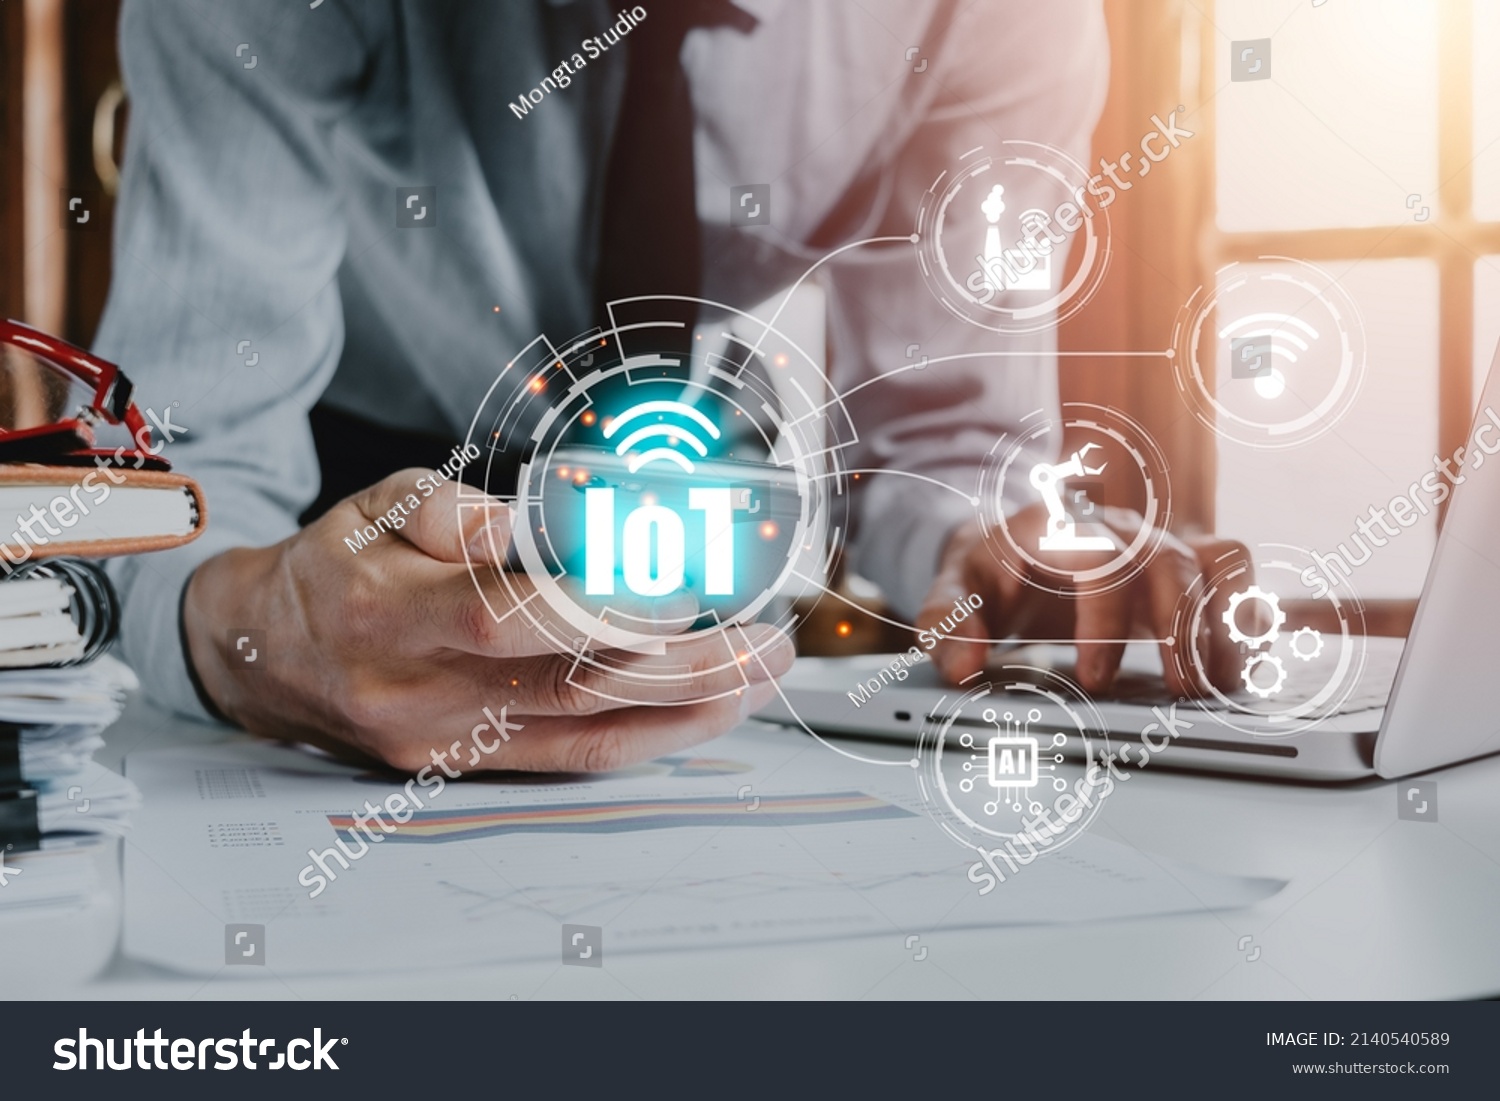 IOT Internet of things, Person hand touching smart phone with VR screen Internet of things icon background, Digital transformation, Modern technology concept. #2140540589